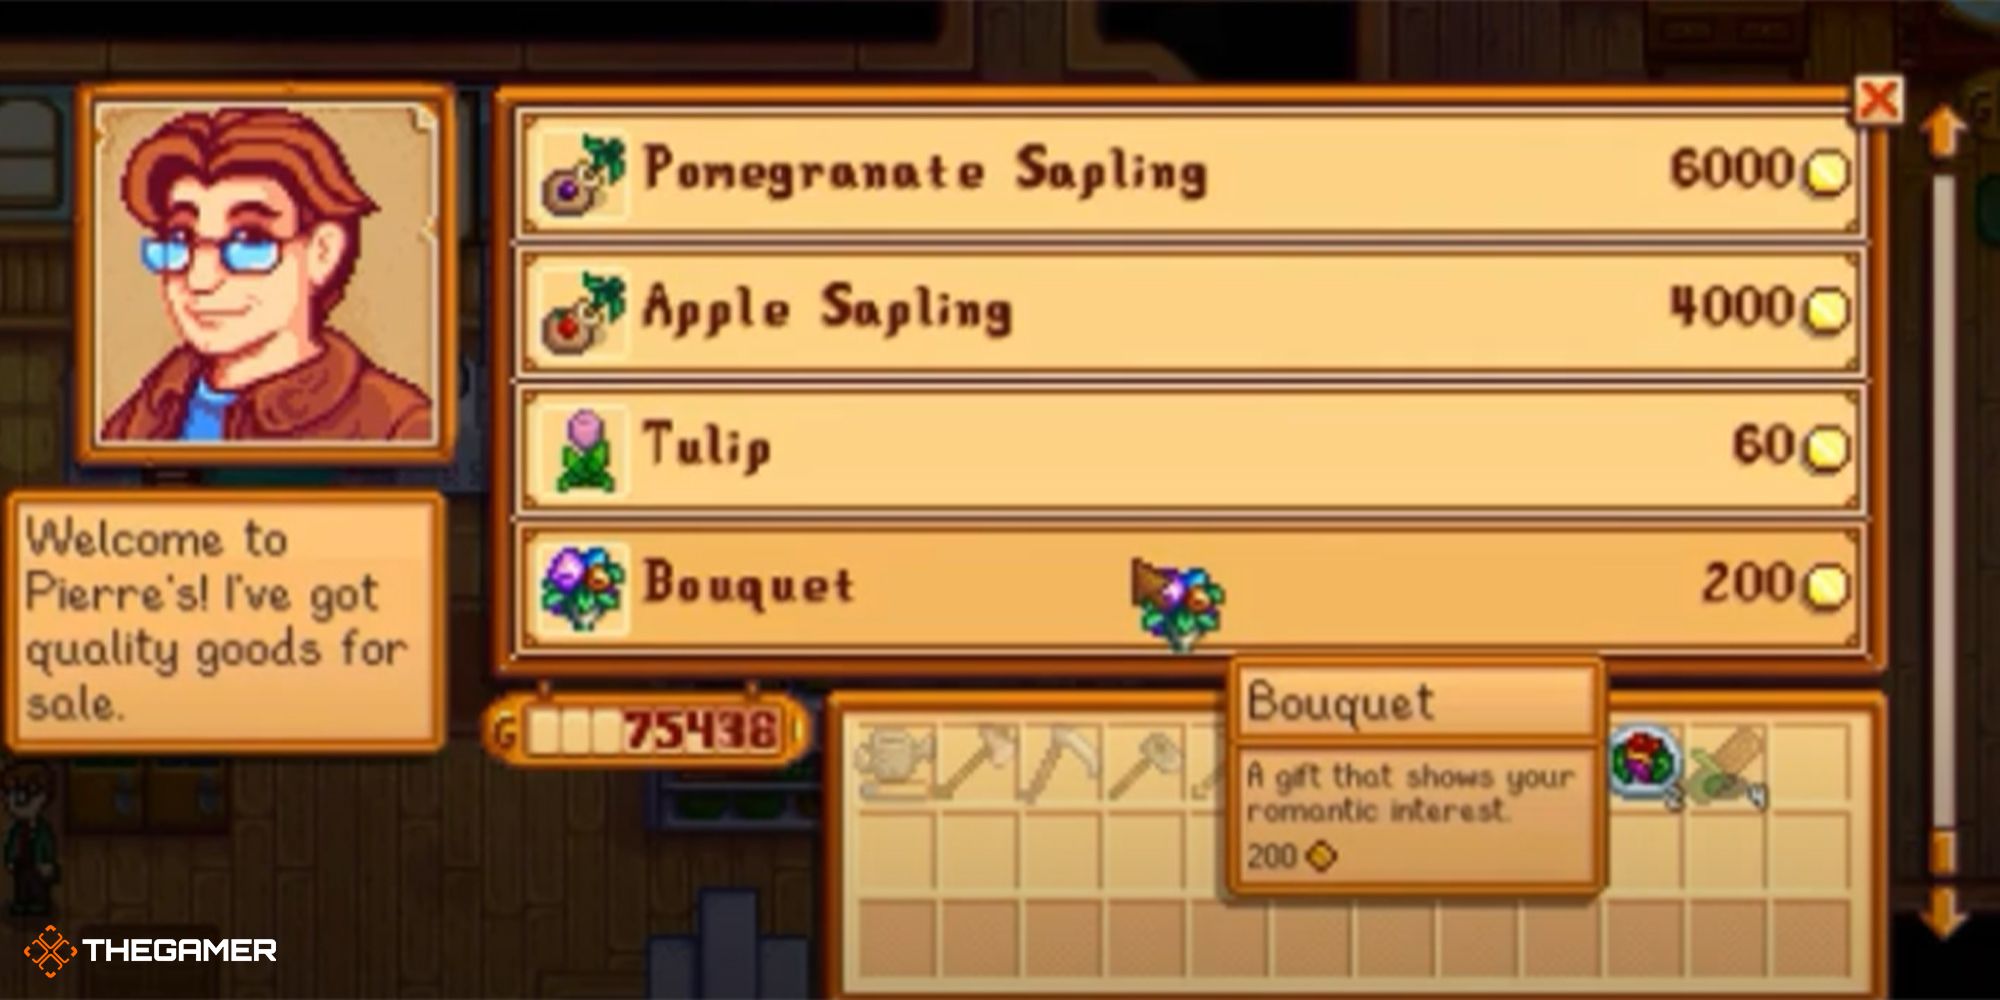 stardew valley - buying a bouquet from pierre